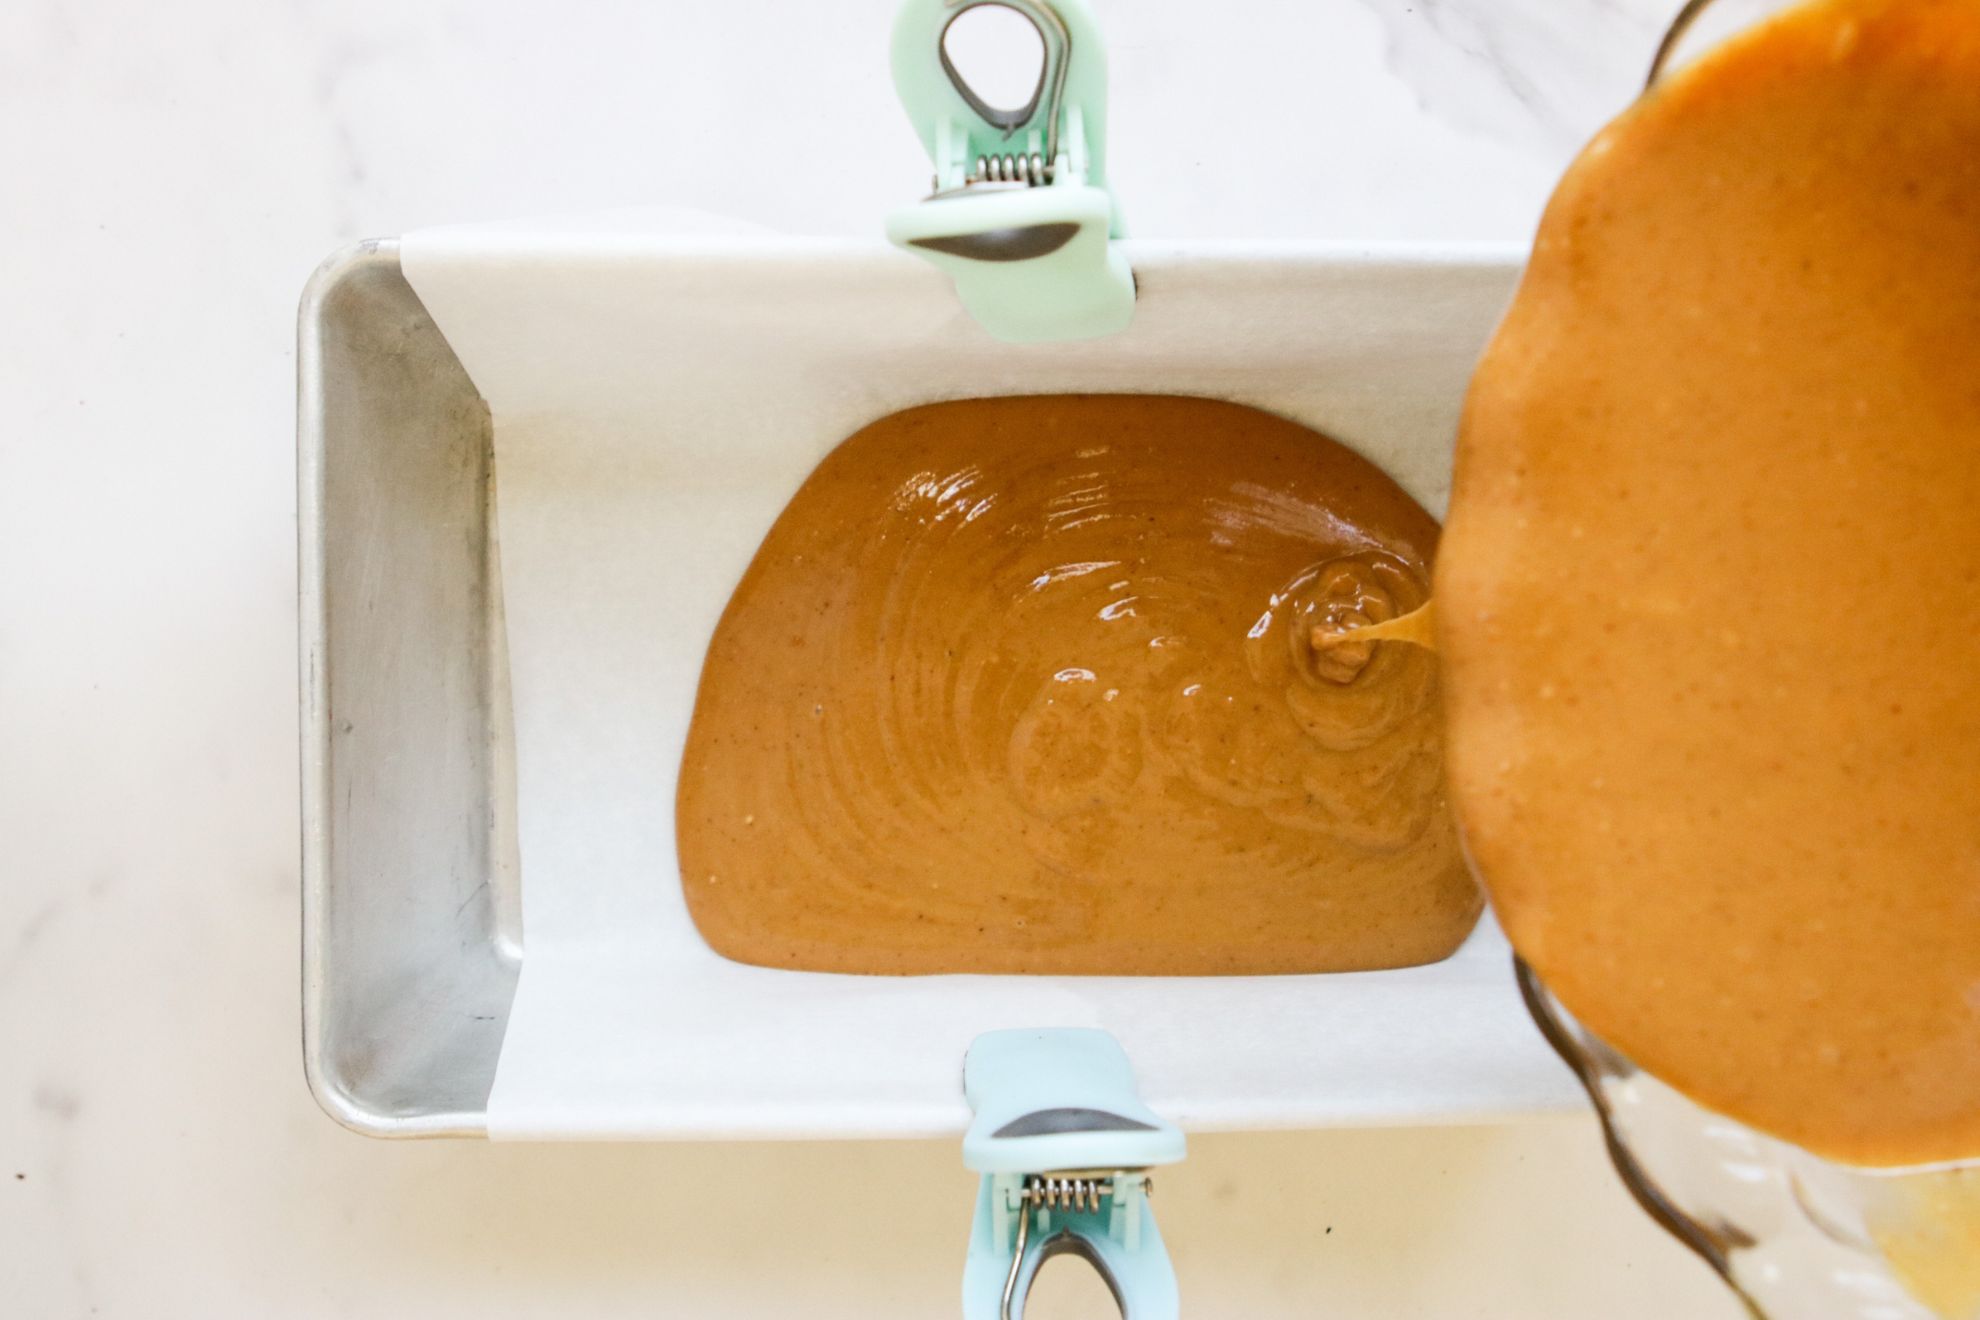 This is an overhead horizontal image of a bread pan lined with parchment paper secured with light blue and green chip clips on the side. The pan sits on a white marble counter. A peanut butter mixture is being poured from a glass bowl coming from the right side of the image. The peanut butter mixture is being poured into the pan and a puddle of peanut butter mixture is in the bottom of the pan.